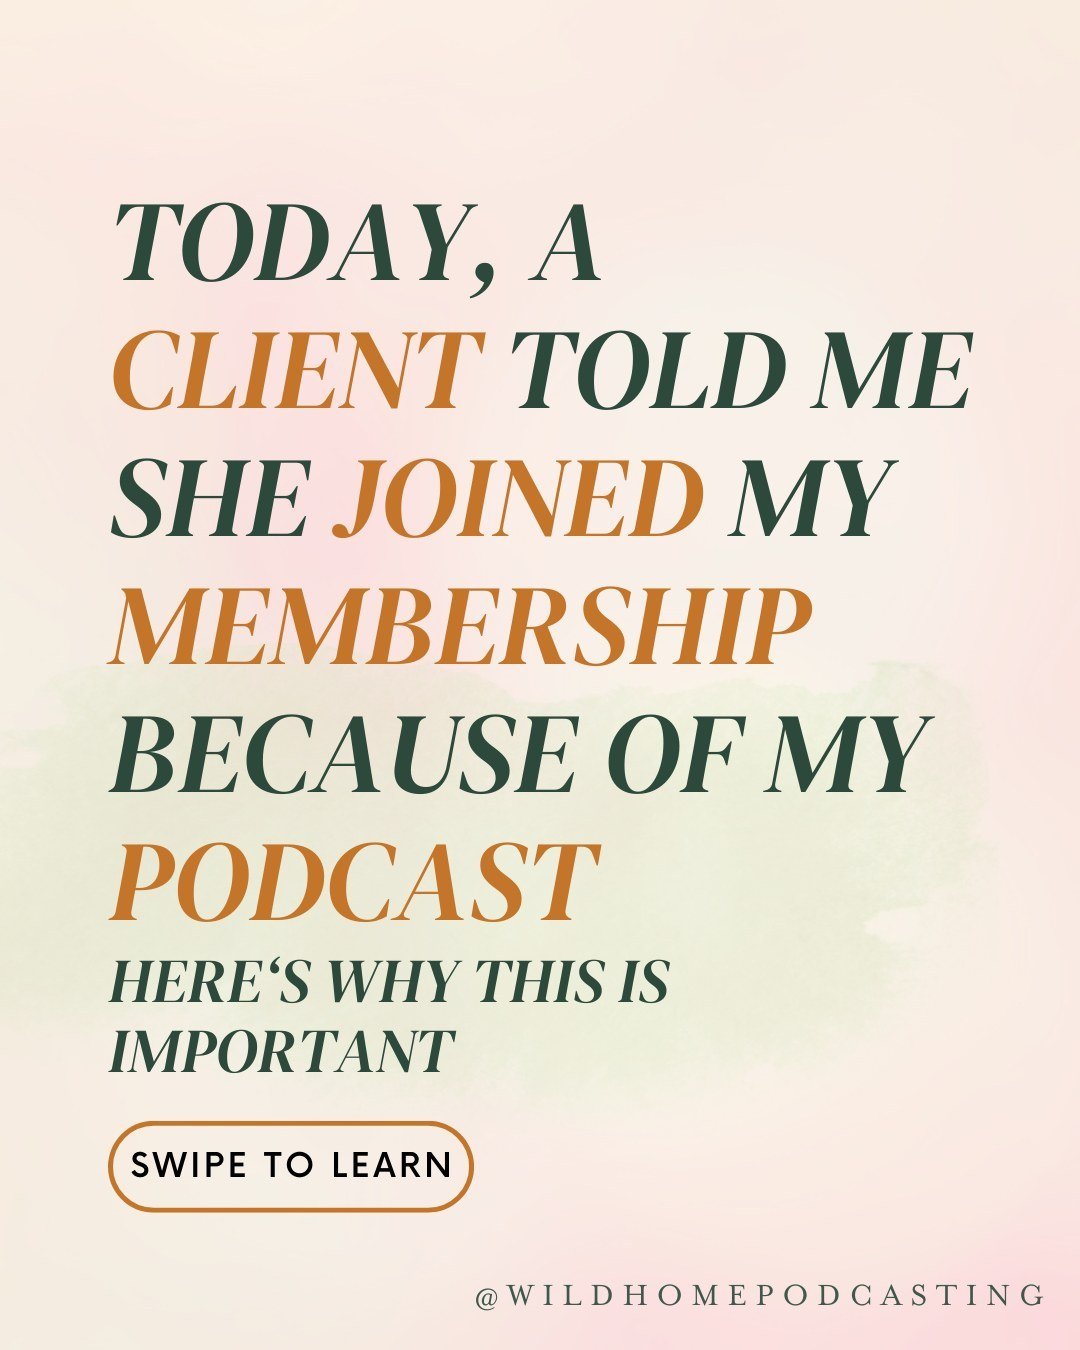 Here&rsquo;s a little secret: launching a podcast doesn&rsquo;t have to be hard. And creating a podcast funnel will take your podcast from a time-consuming hobby to a lead and marketing machine for your business.⁠
⁠
In the Launch Your Podcast Funnel 